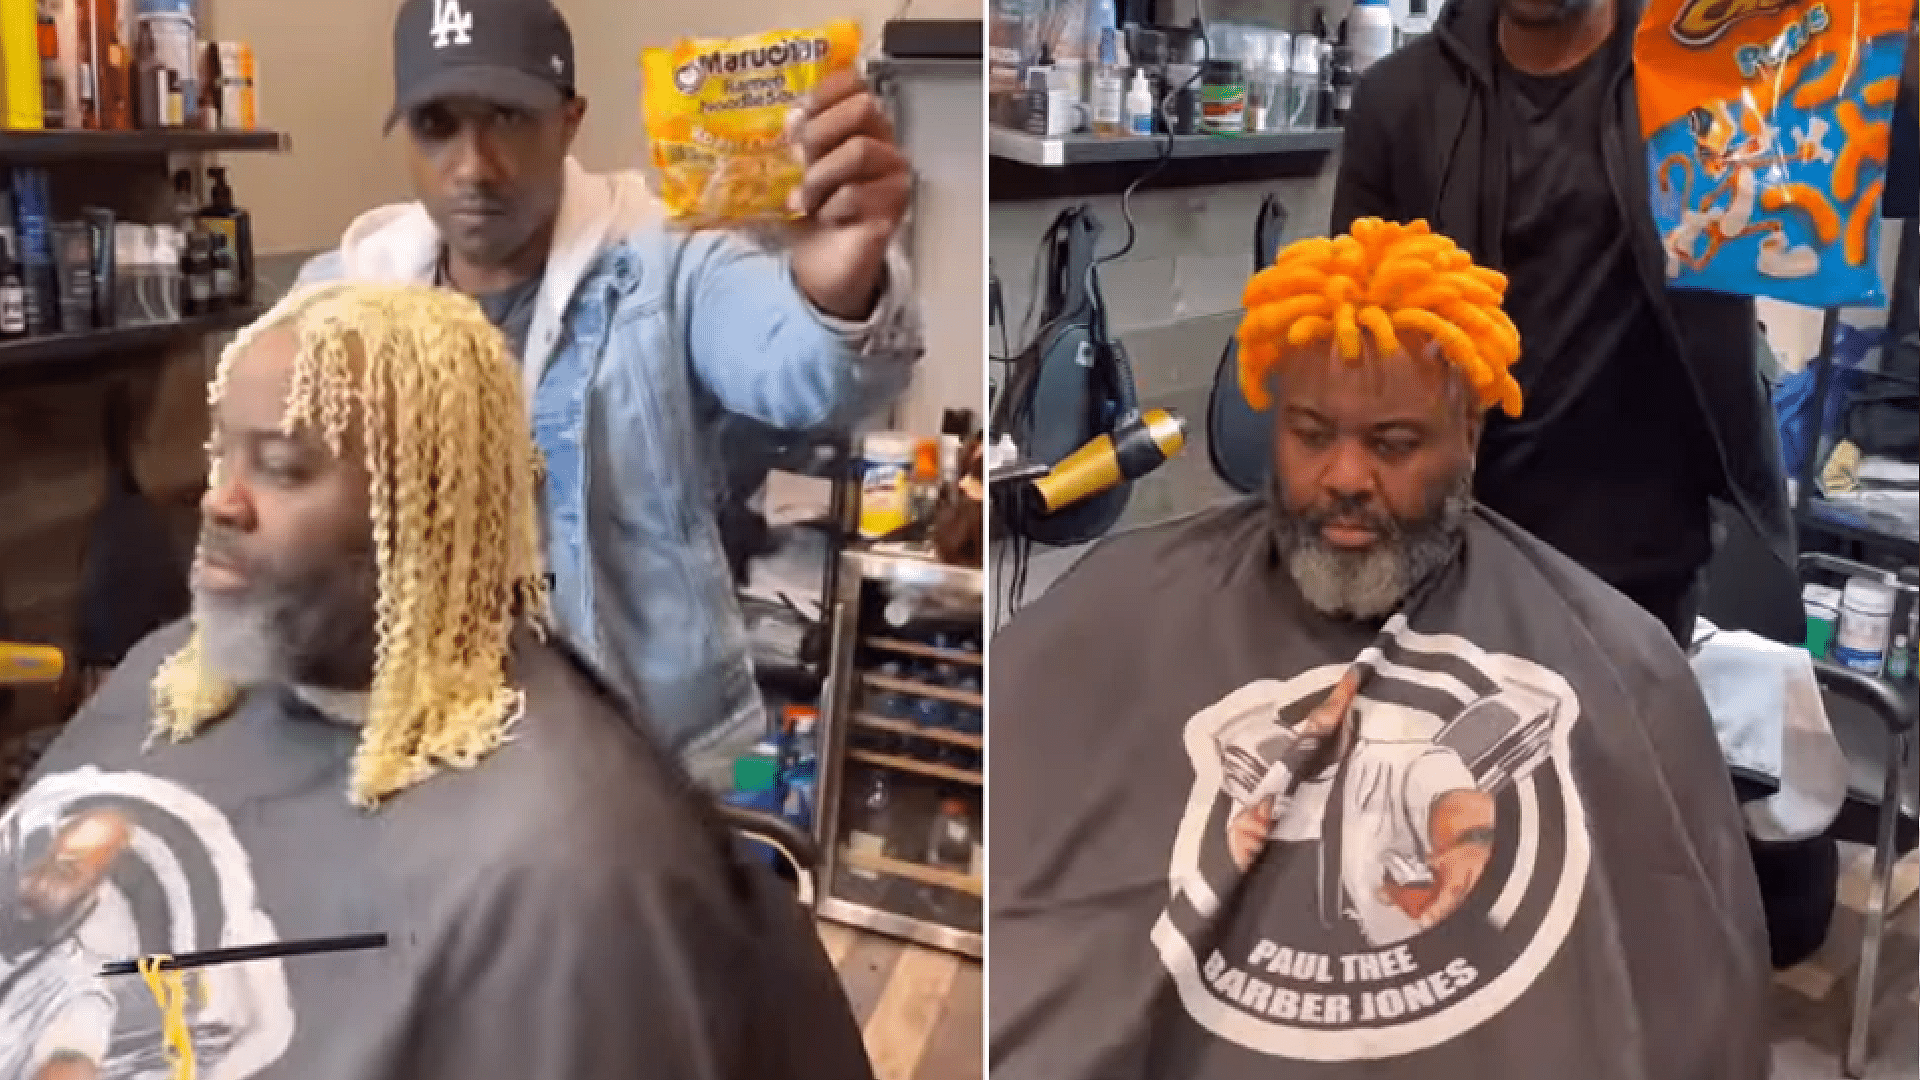 strange hairstyle of the person is going viral on internet there are food items on his head